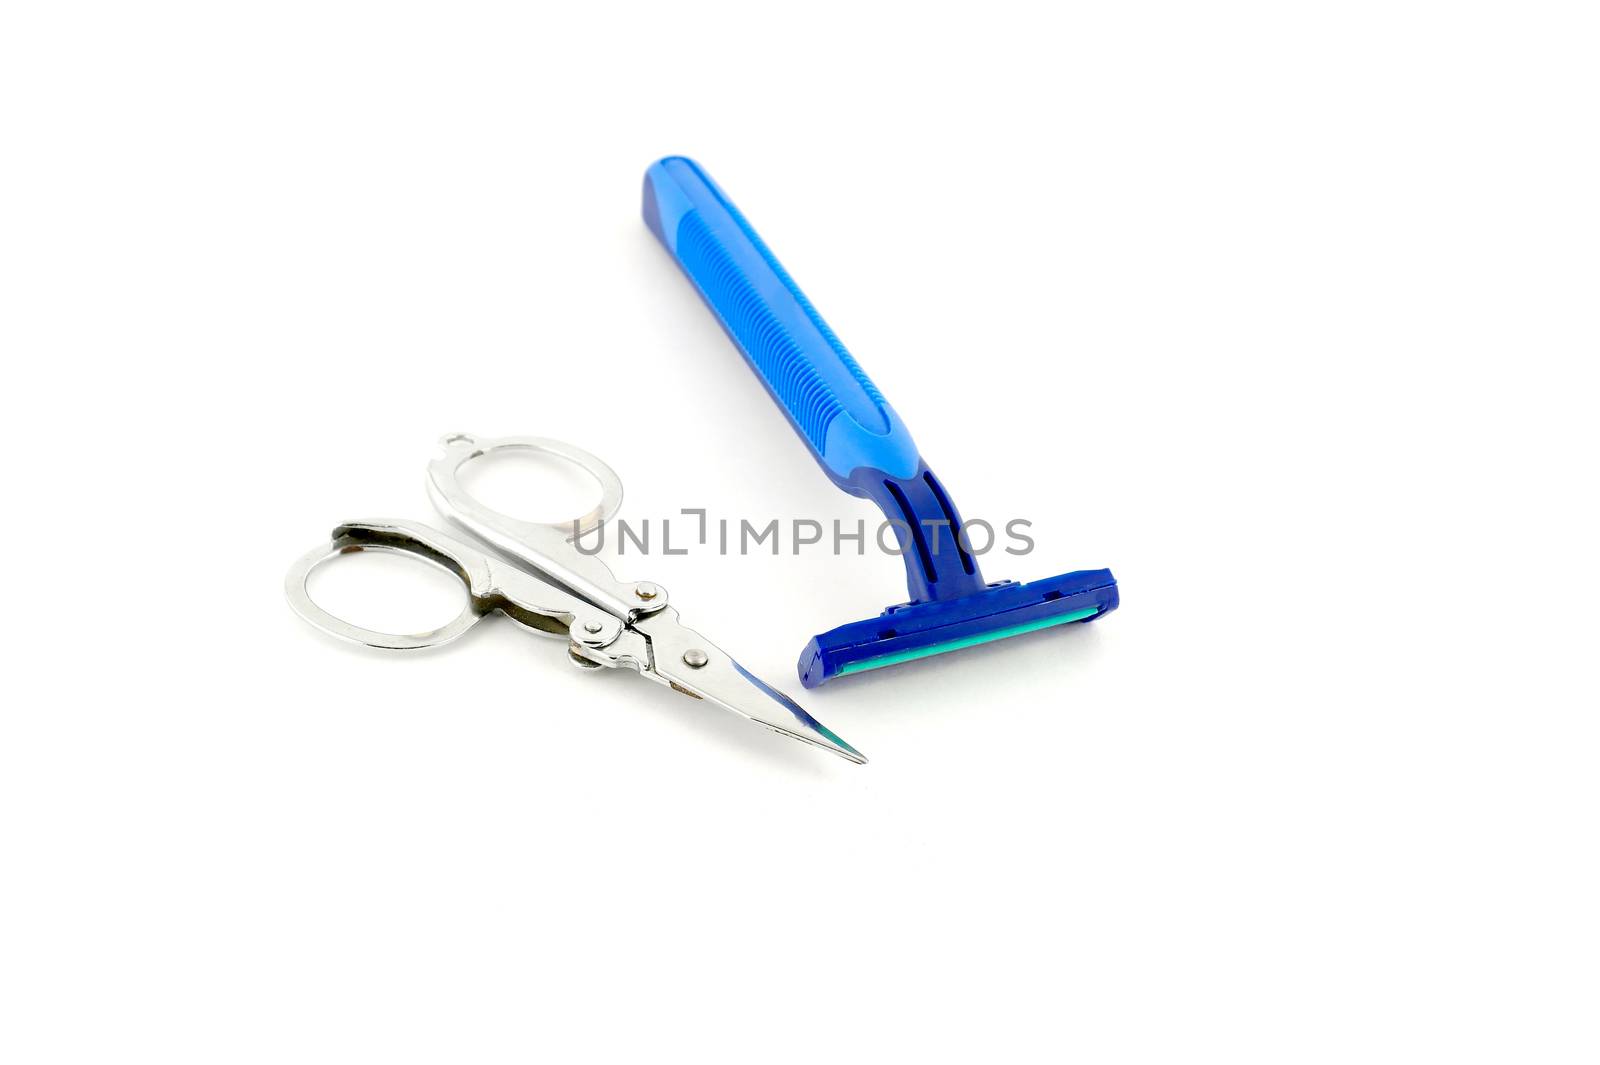 Shaving-set and nail scissors over white by sergpet